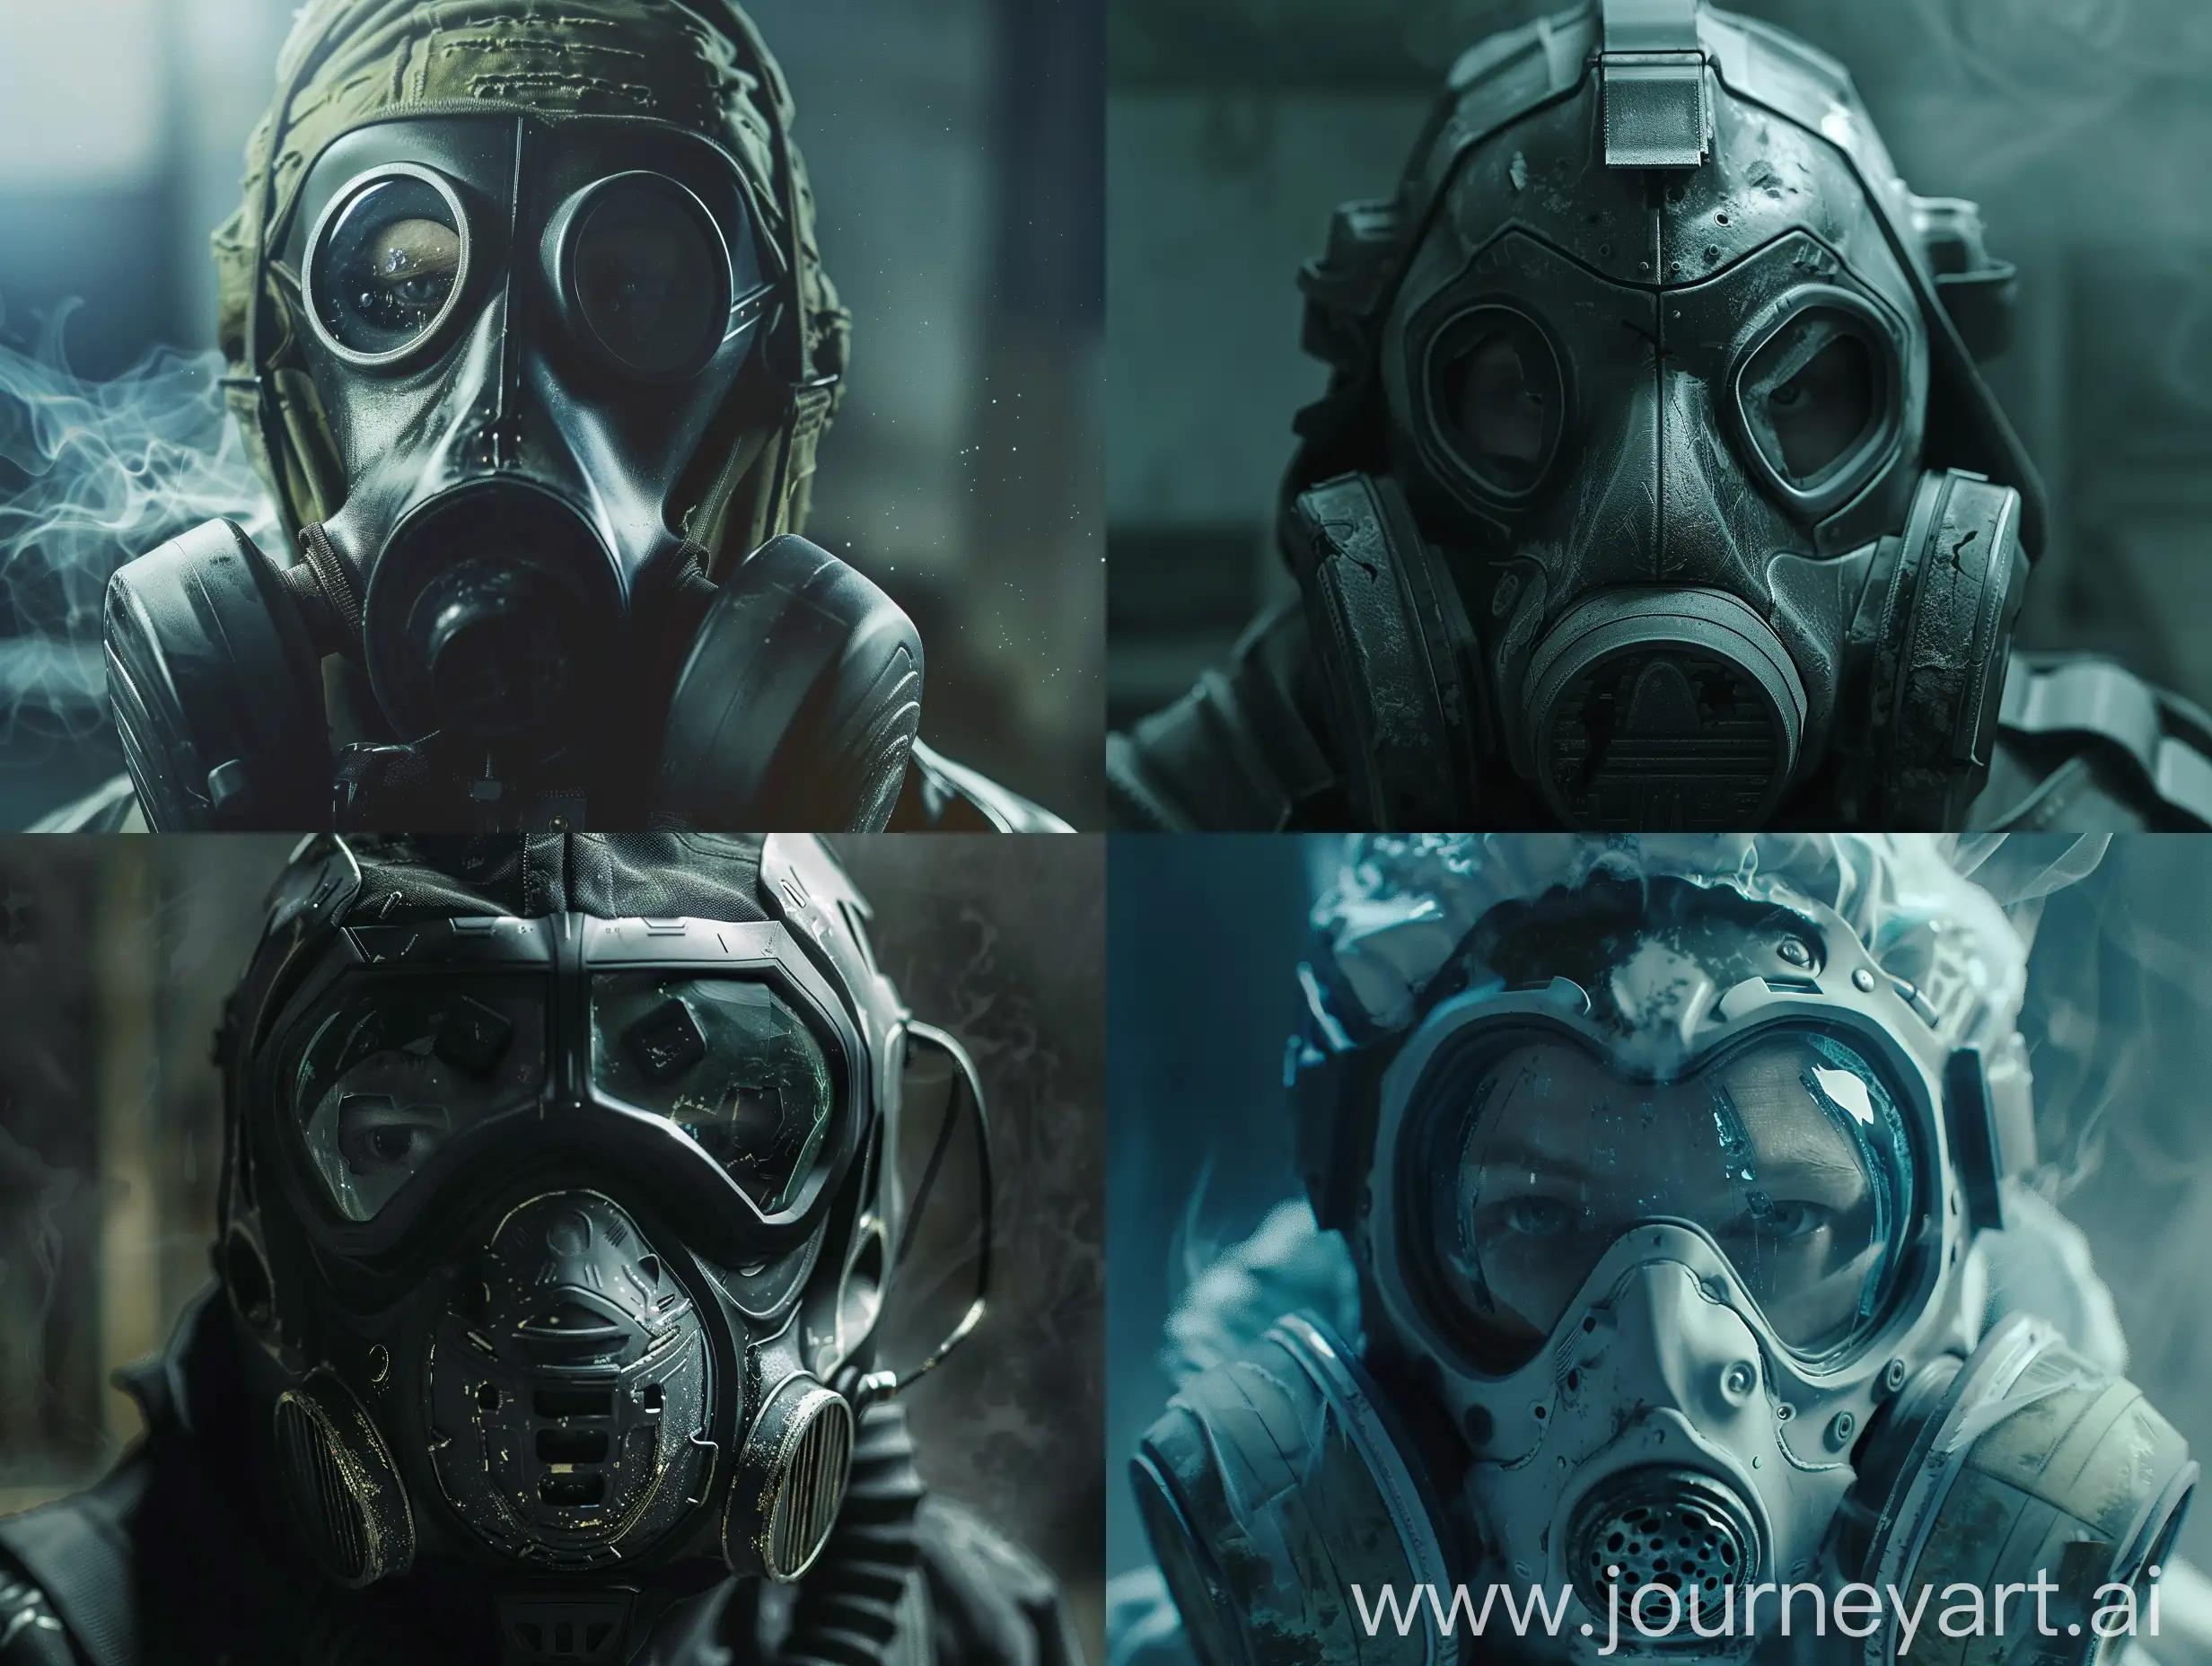 A picture of a stalker's face wearing a futuristic gas mask. Chernobyl. Cinematic. Epic. Close up. Obscure atmosphere